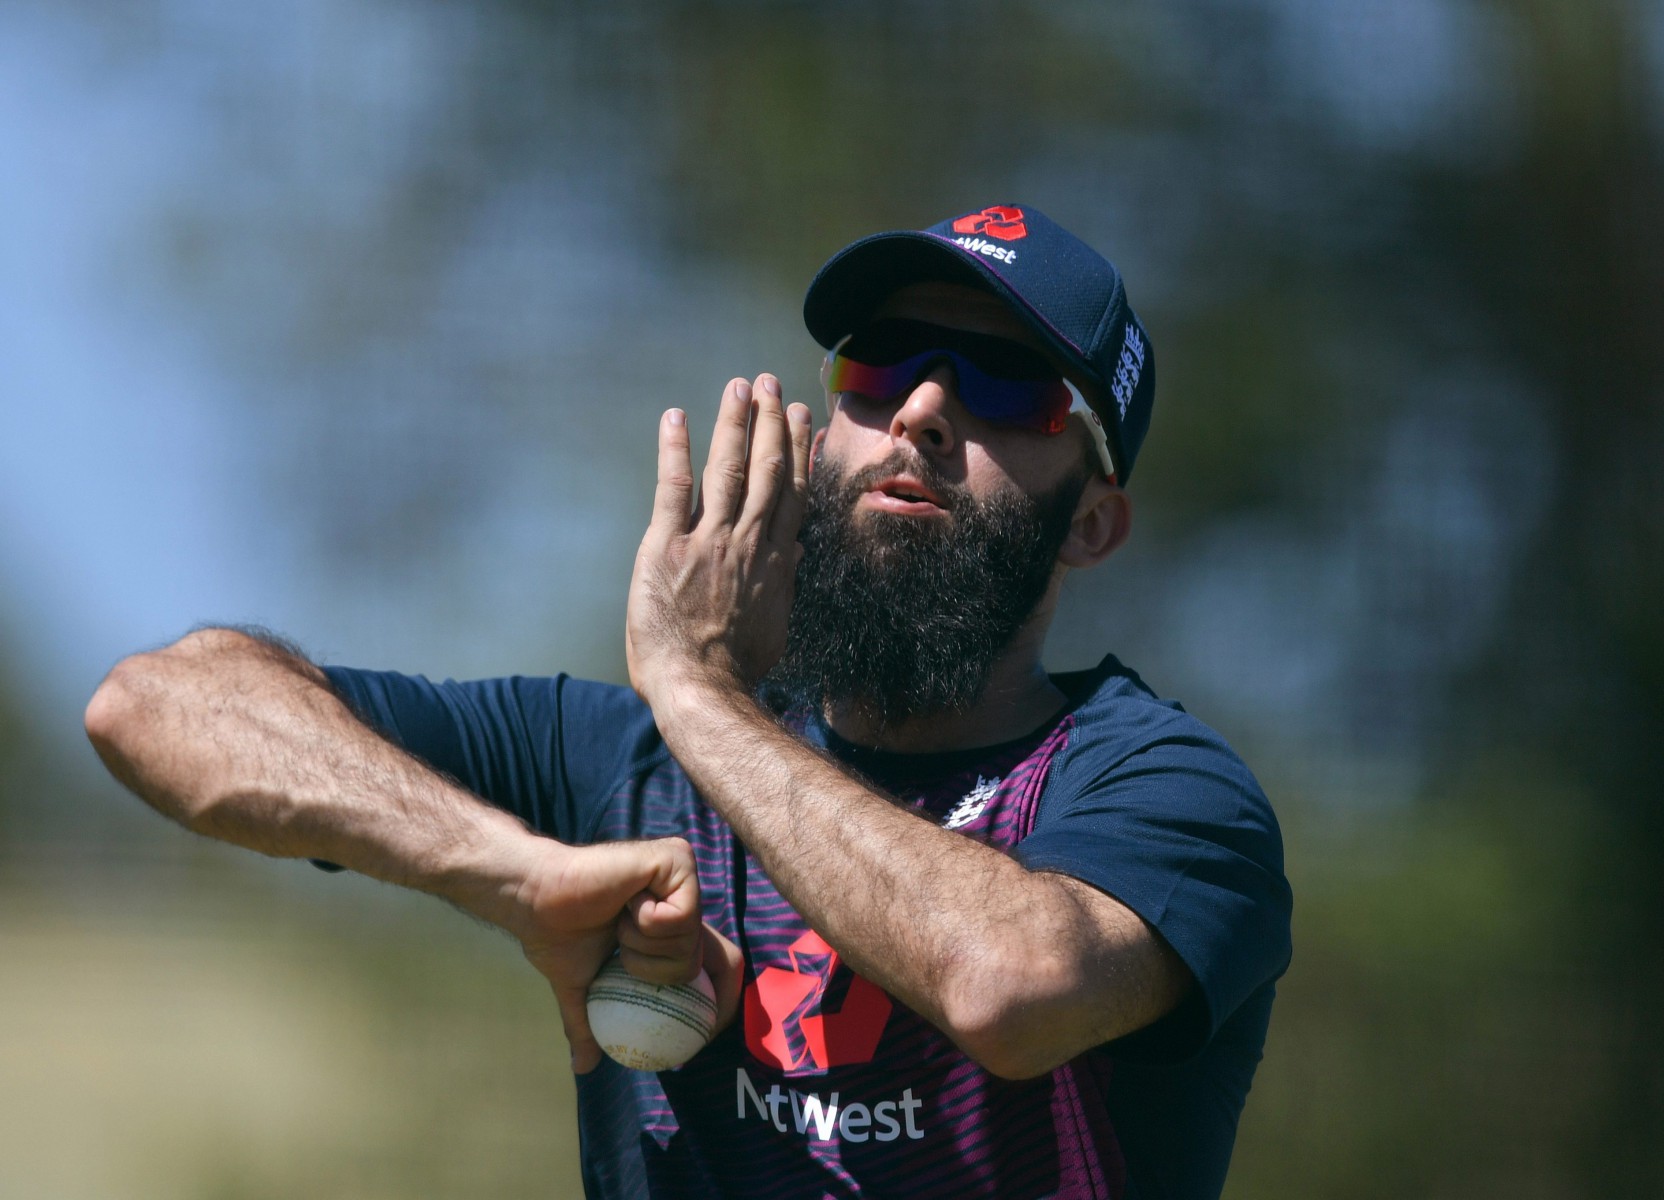 , Moeen Ali will be back with bang for England in South Africa ODI after struggling with Test pressures, says Graeme Swann